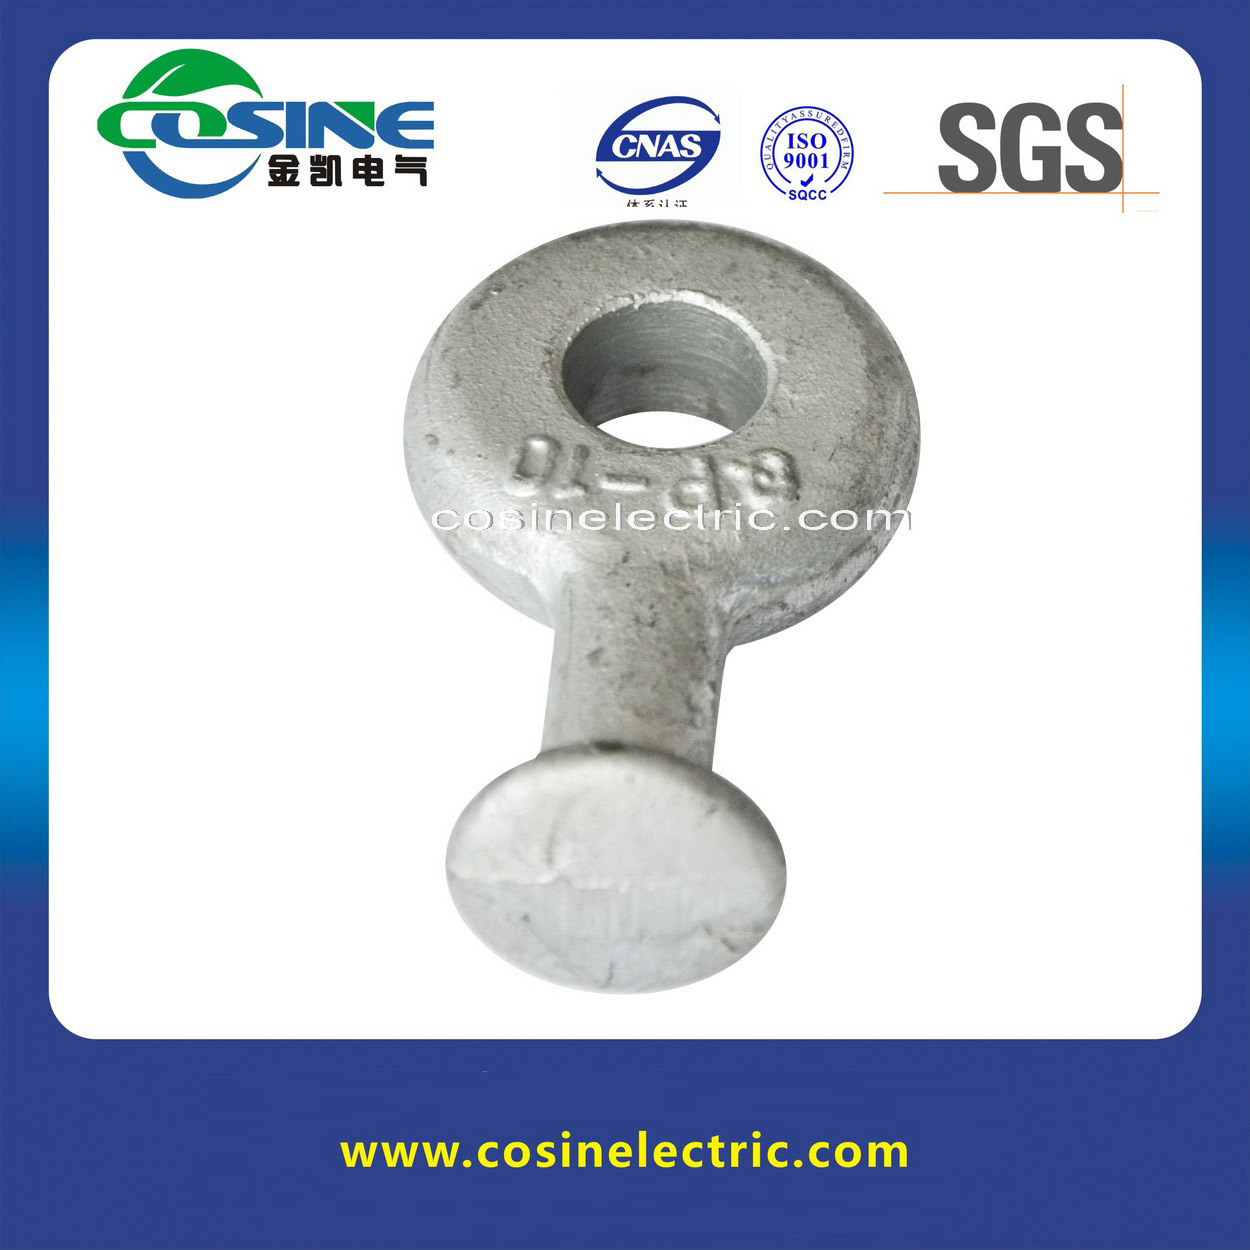 Q Type Ball Oval Eye for Overhead Transmission Line